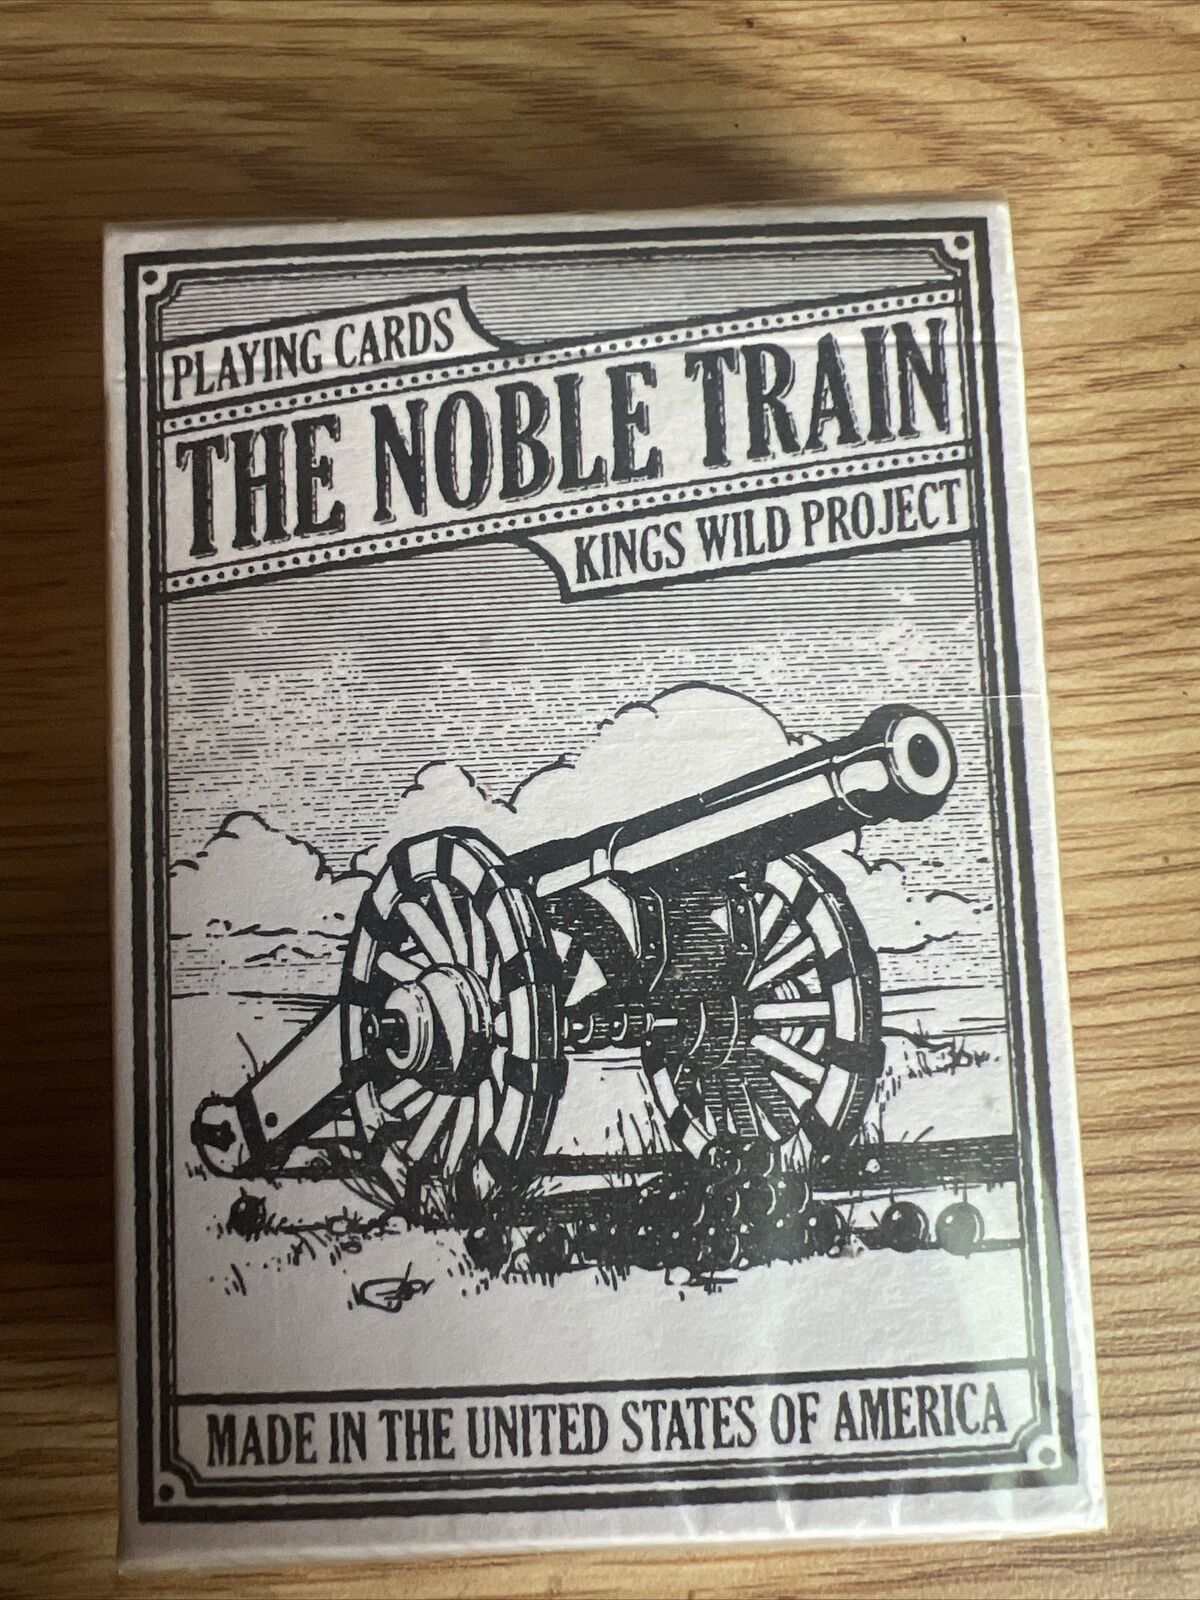 Playing Card The Nobel Train